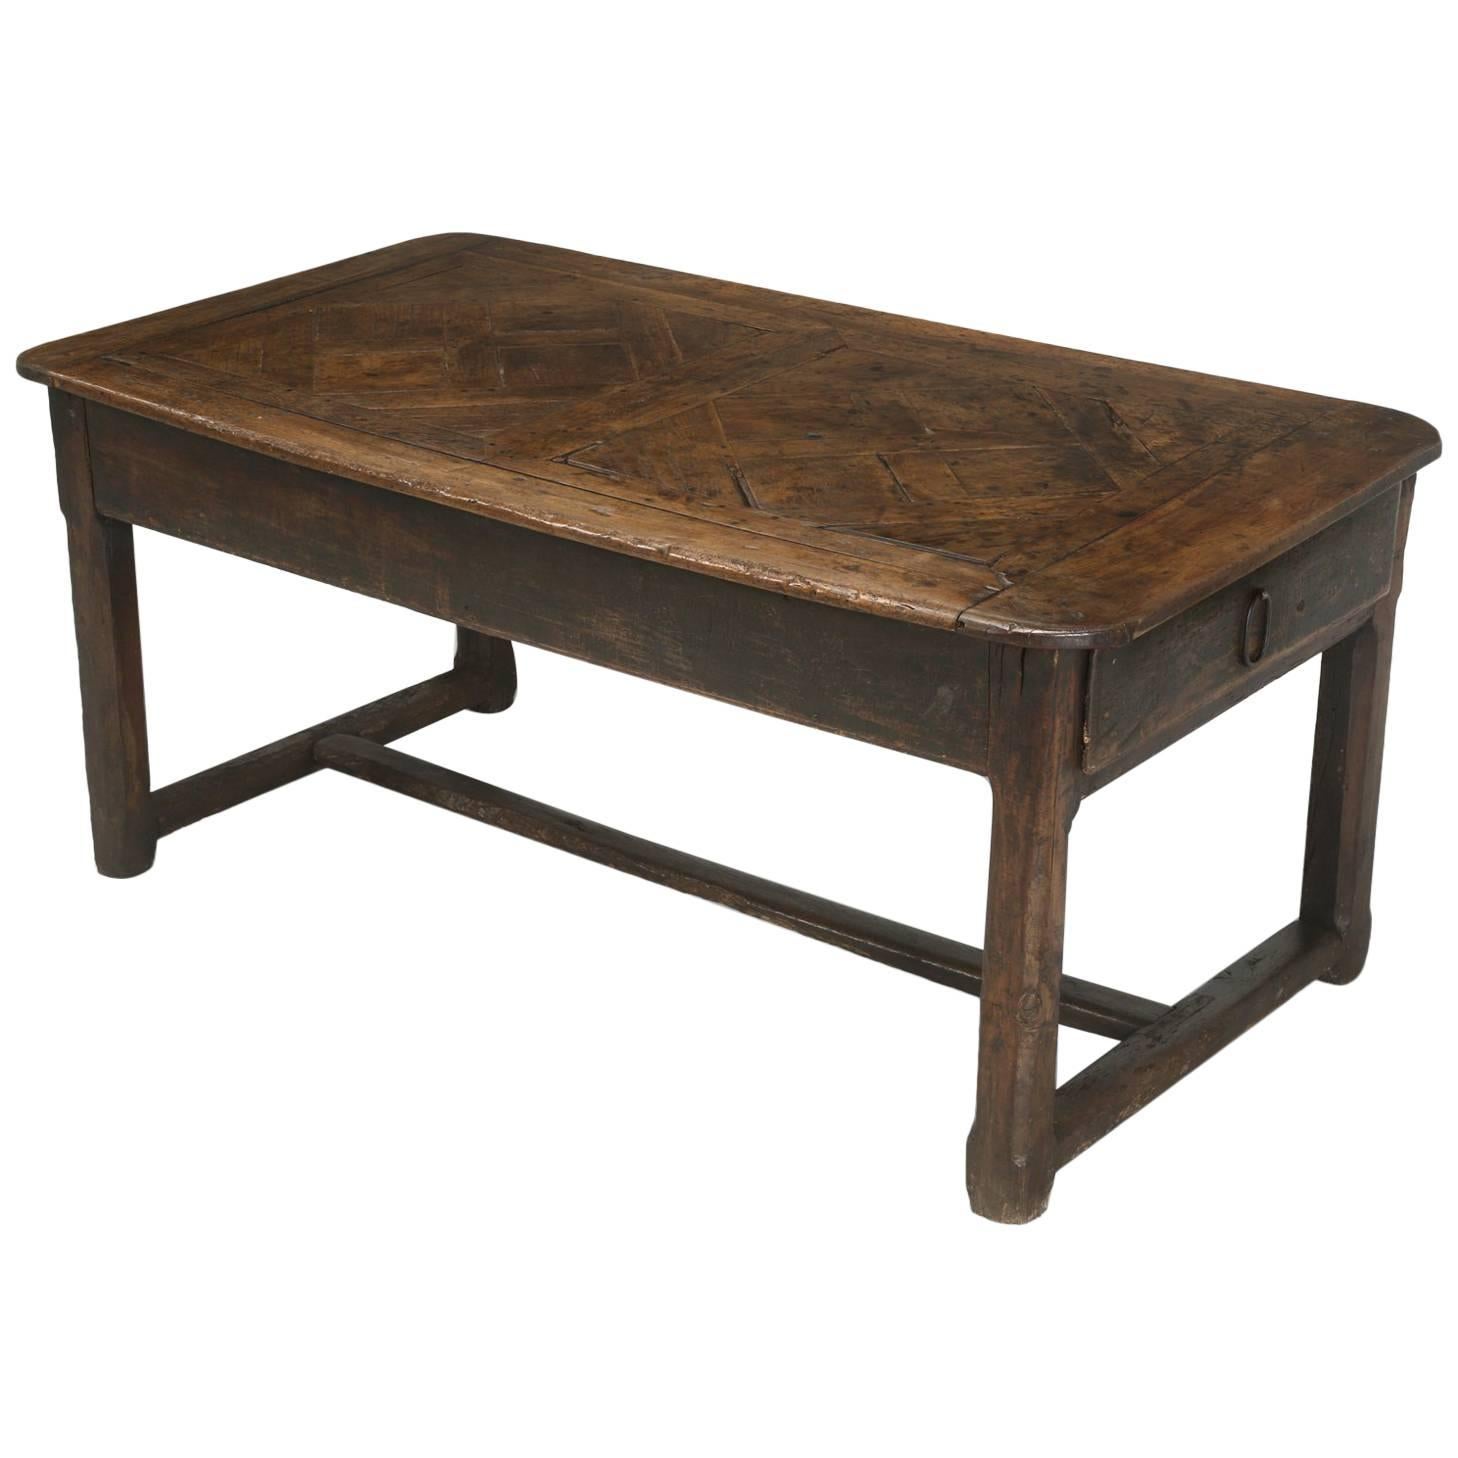 Antique French Farm Table with Drawer, circa 1700